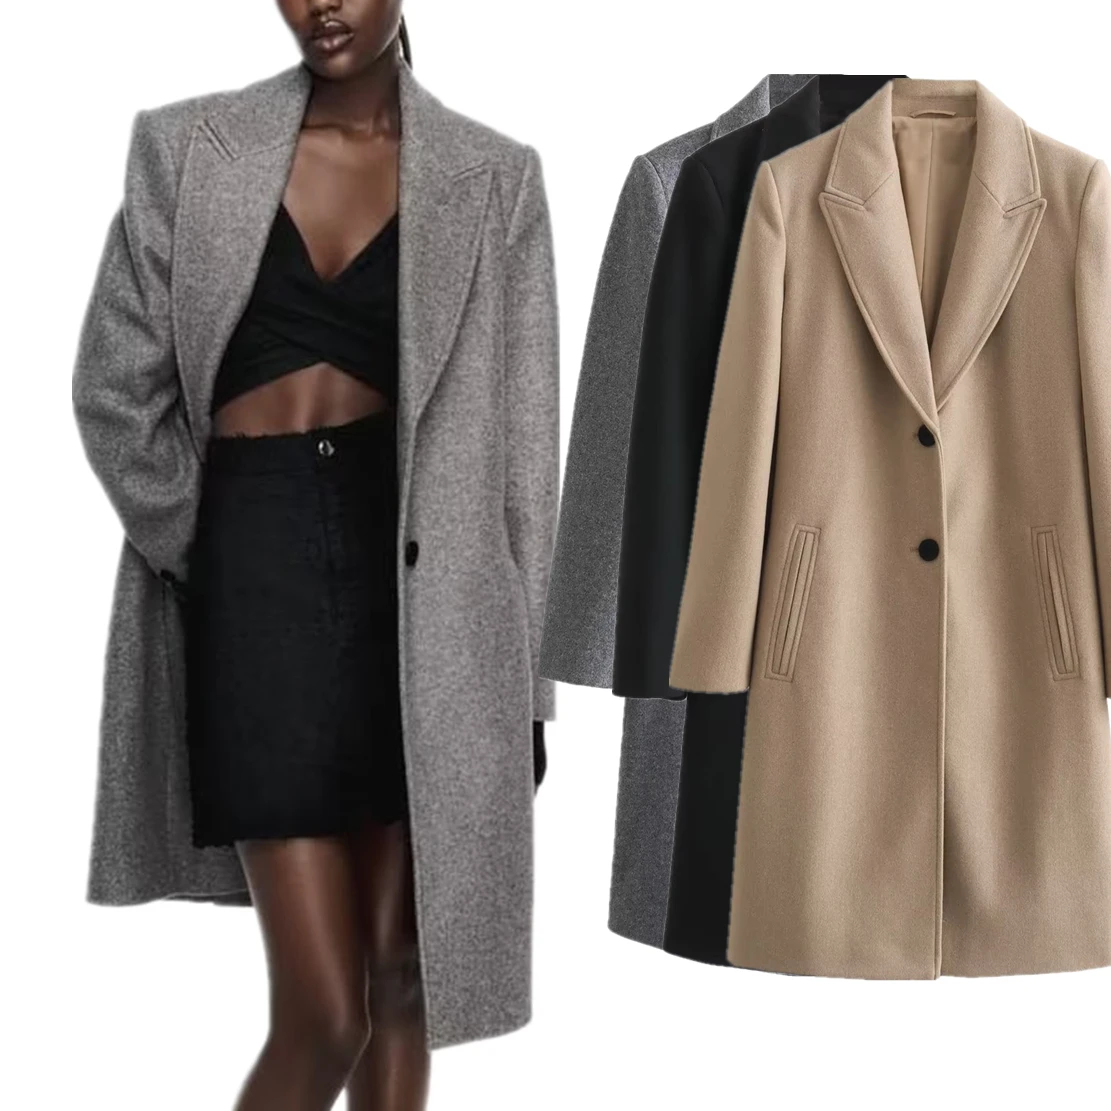 

Dave&Di Autumn Winter British Fashion Woolen Long Coat Solid Waist Fit Simple Trench Coat Women